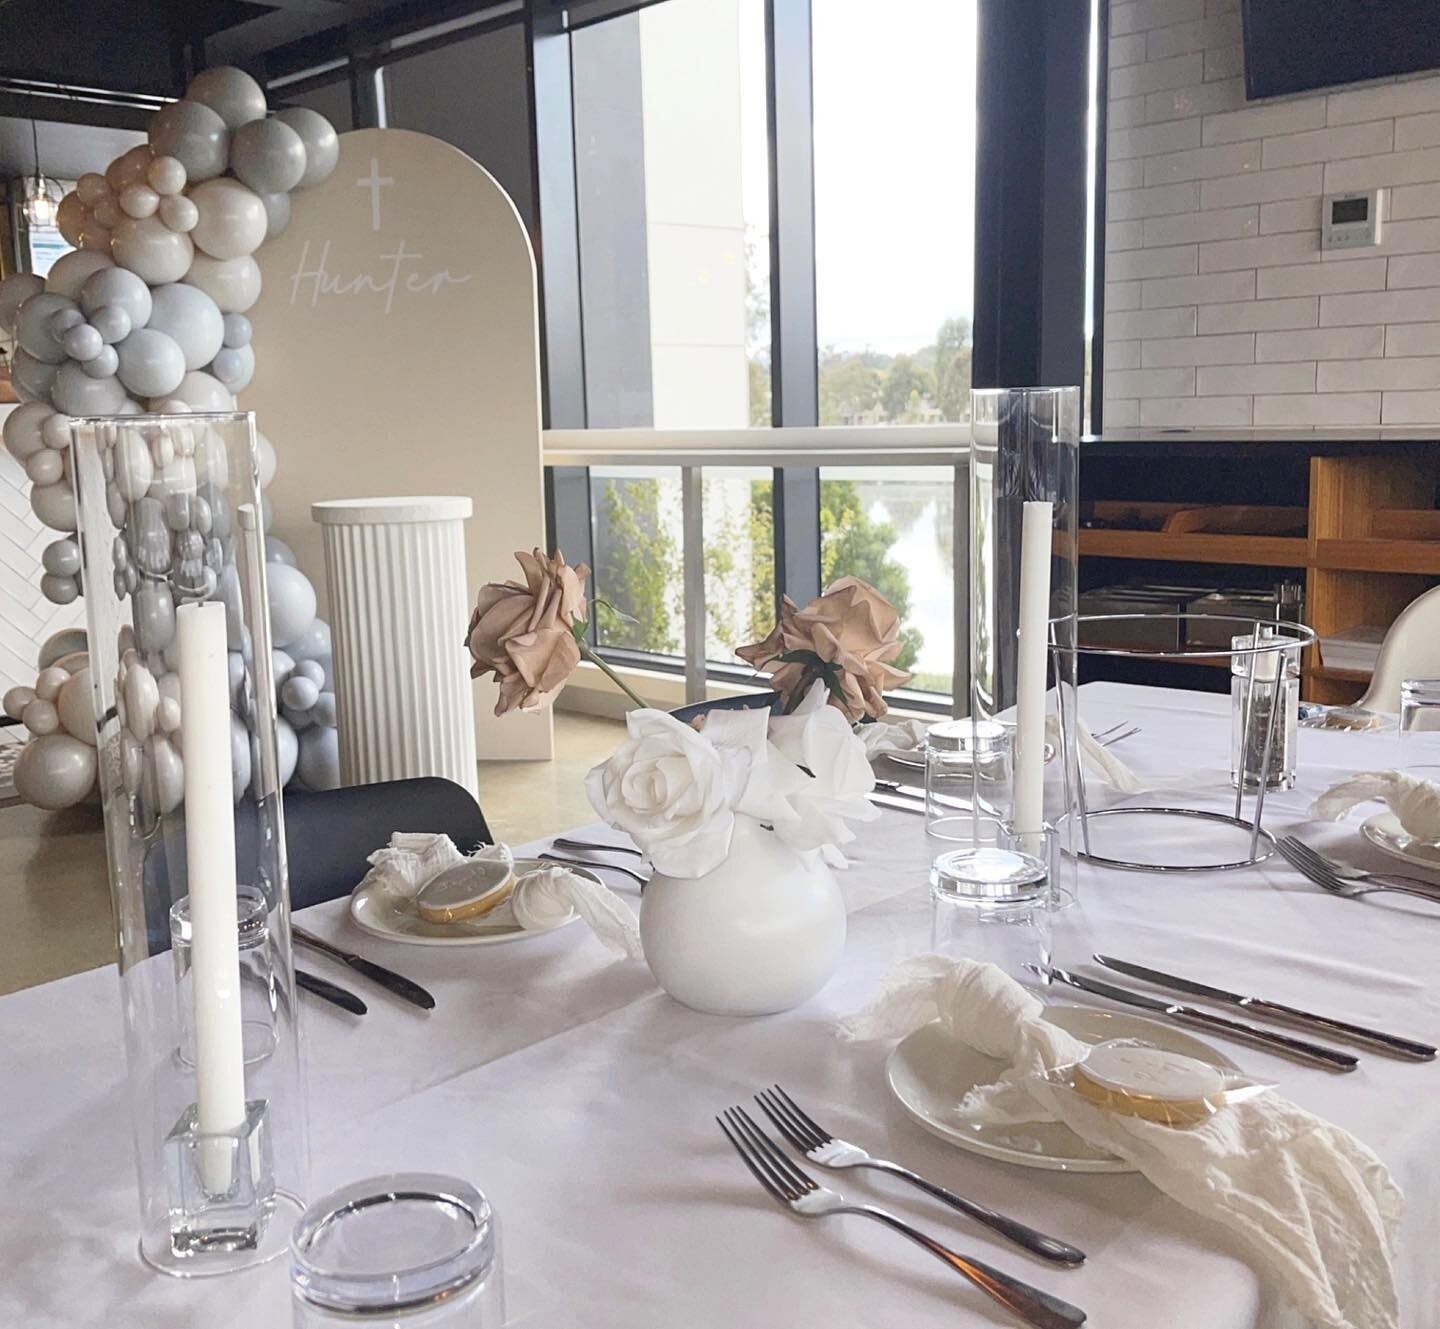 Are you looking for the perfect venue for your next special occasion? Get in touch with the team today via link in bio.⁠
⁠
📷 @melbourneeventstyling⁠
Styling, props, candles, napkins and flowers @melbourneeventstyling ⁠
Balloons @balloonsbyjc ⁠
Cooki